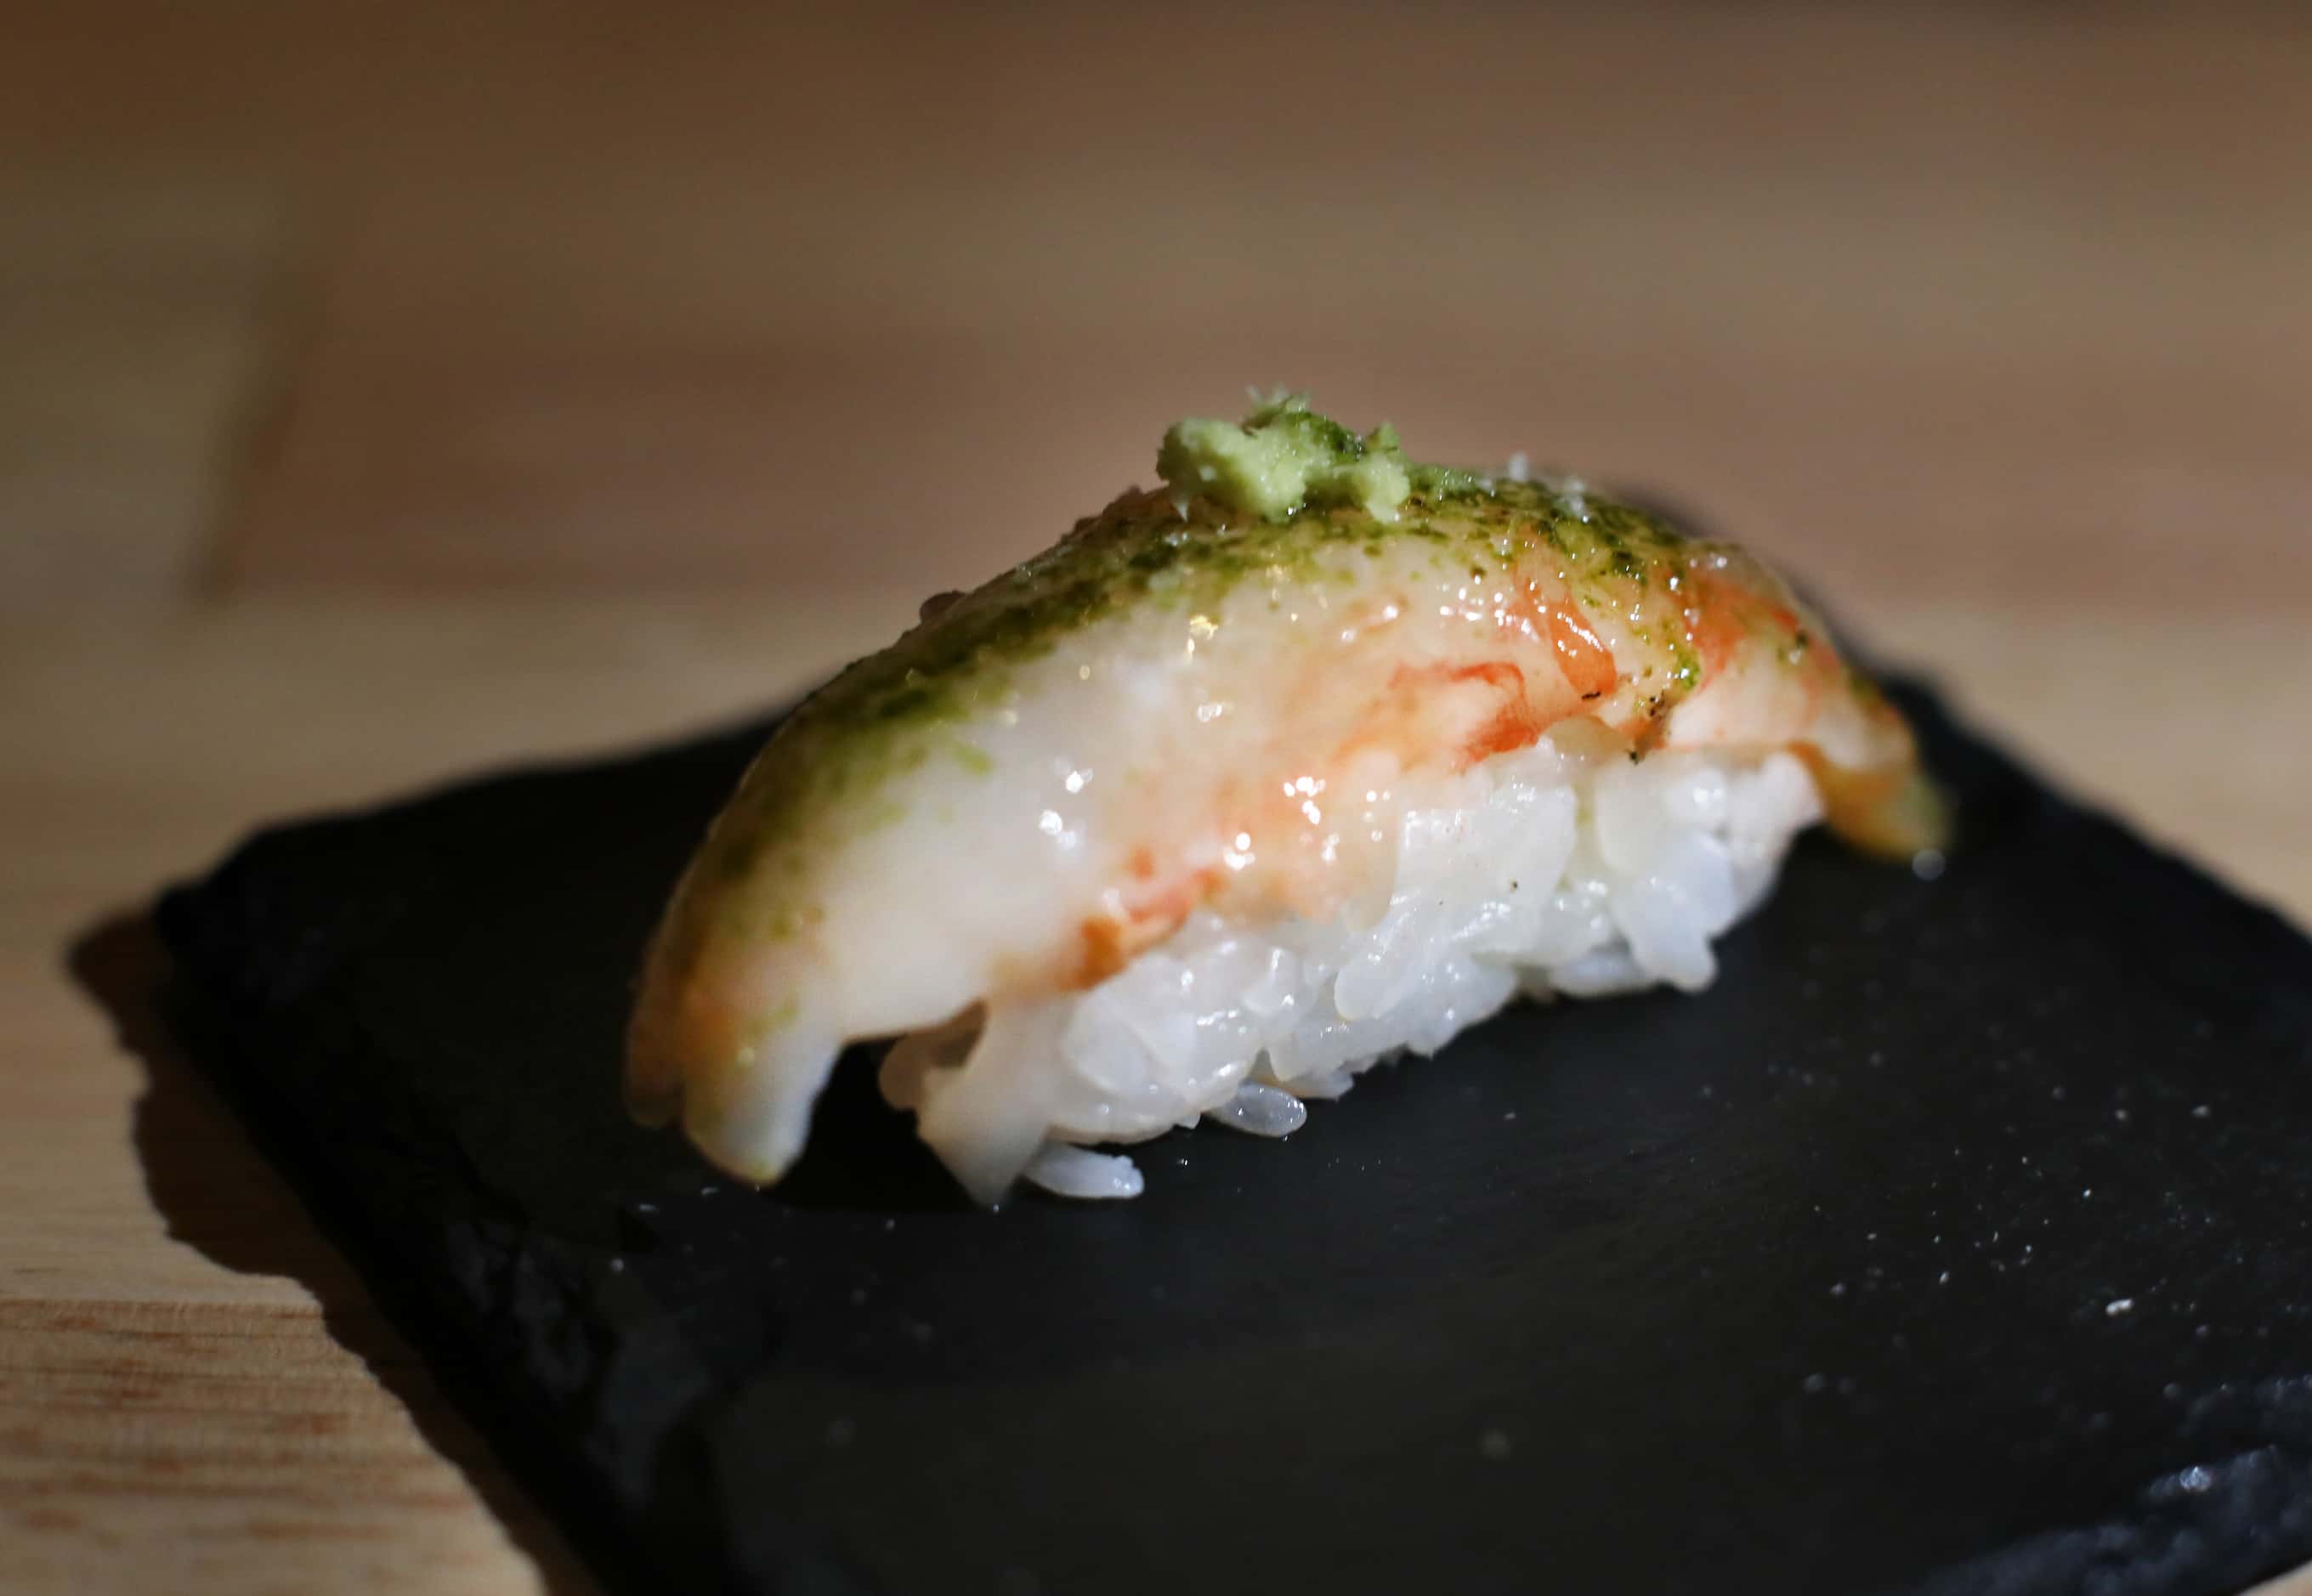 The Prawn at Sushi By Scratch, a secret pop-up restaurant on the eighth floor of The...